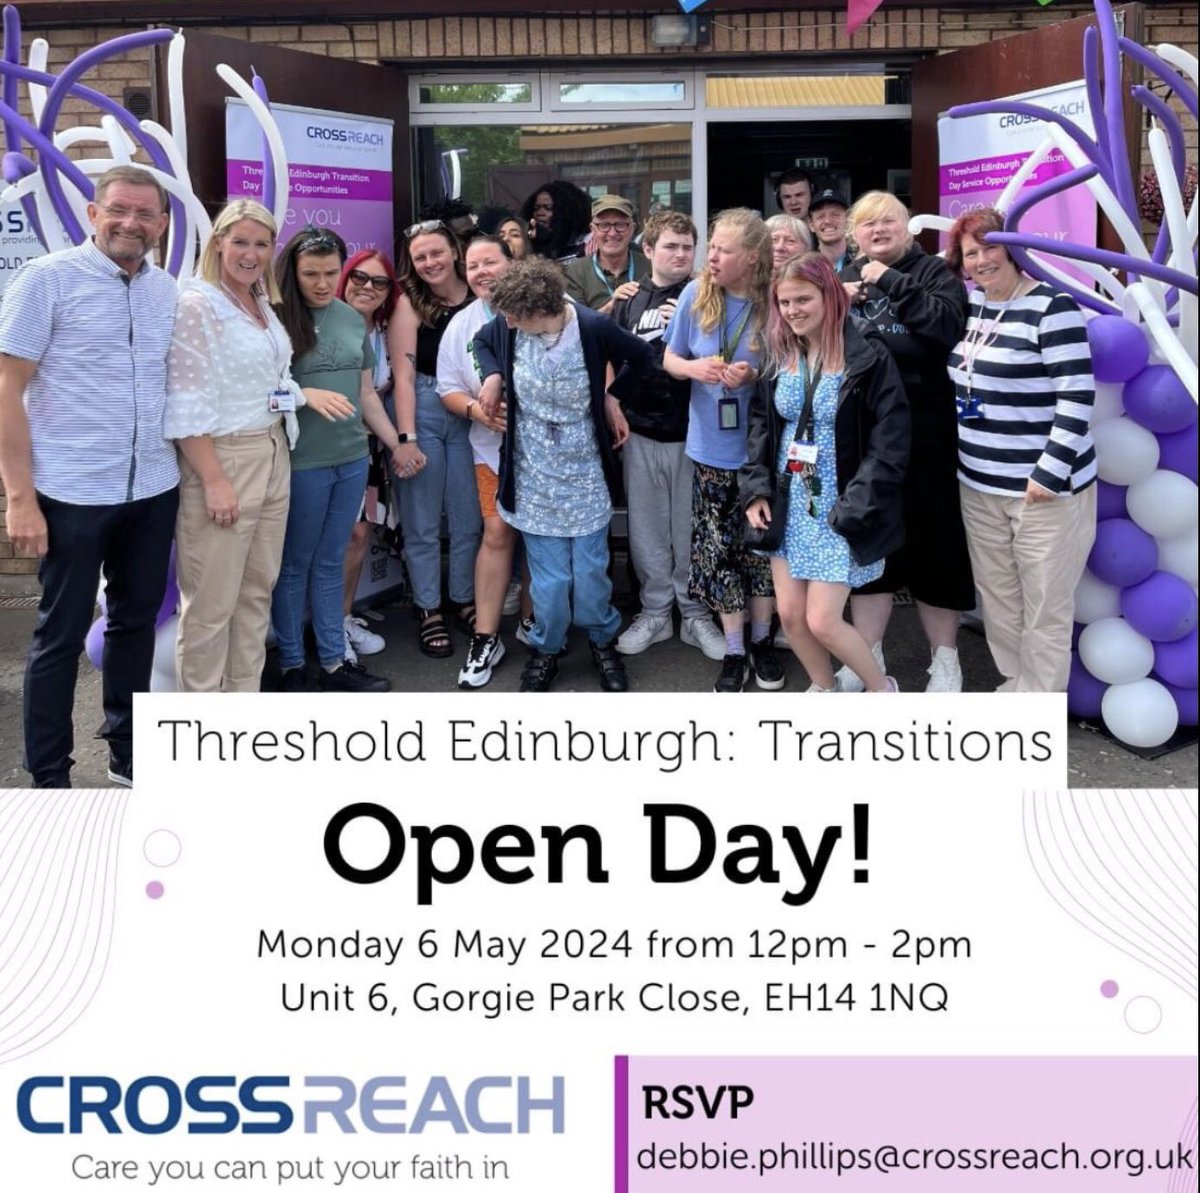 This post school destination open day may be of interest to our parents and carers. @CrossReach